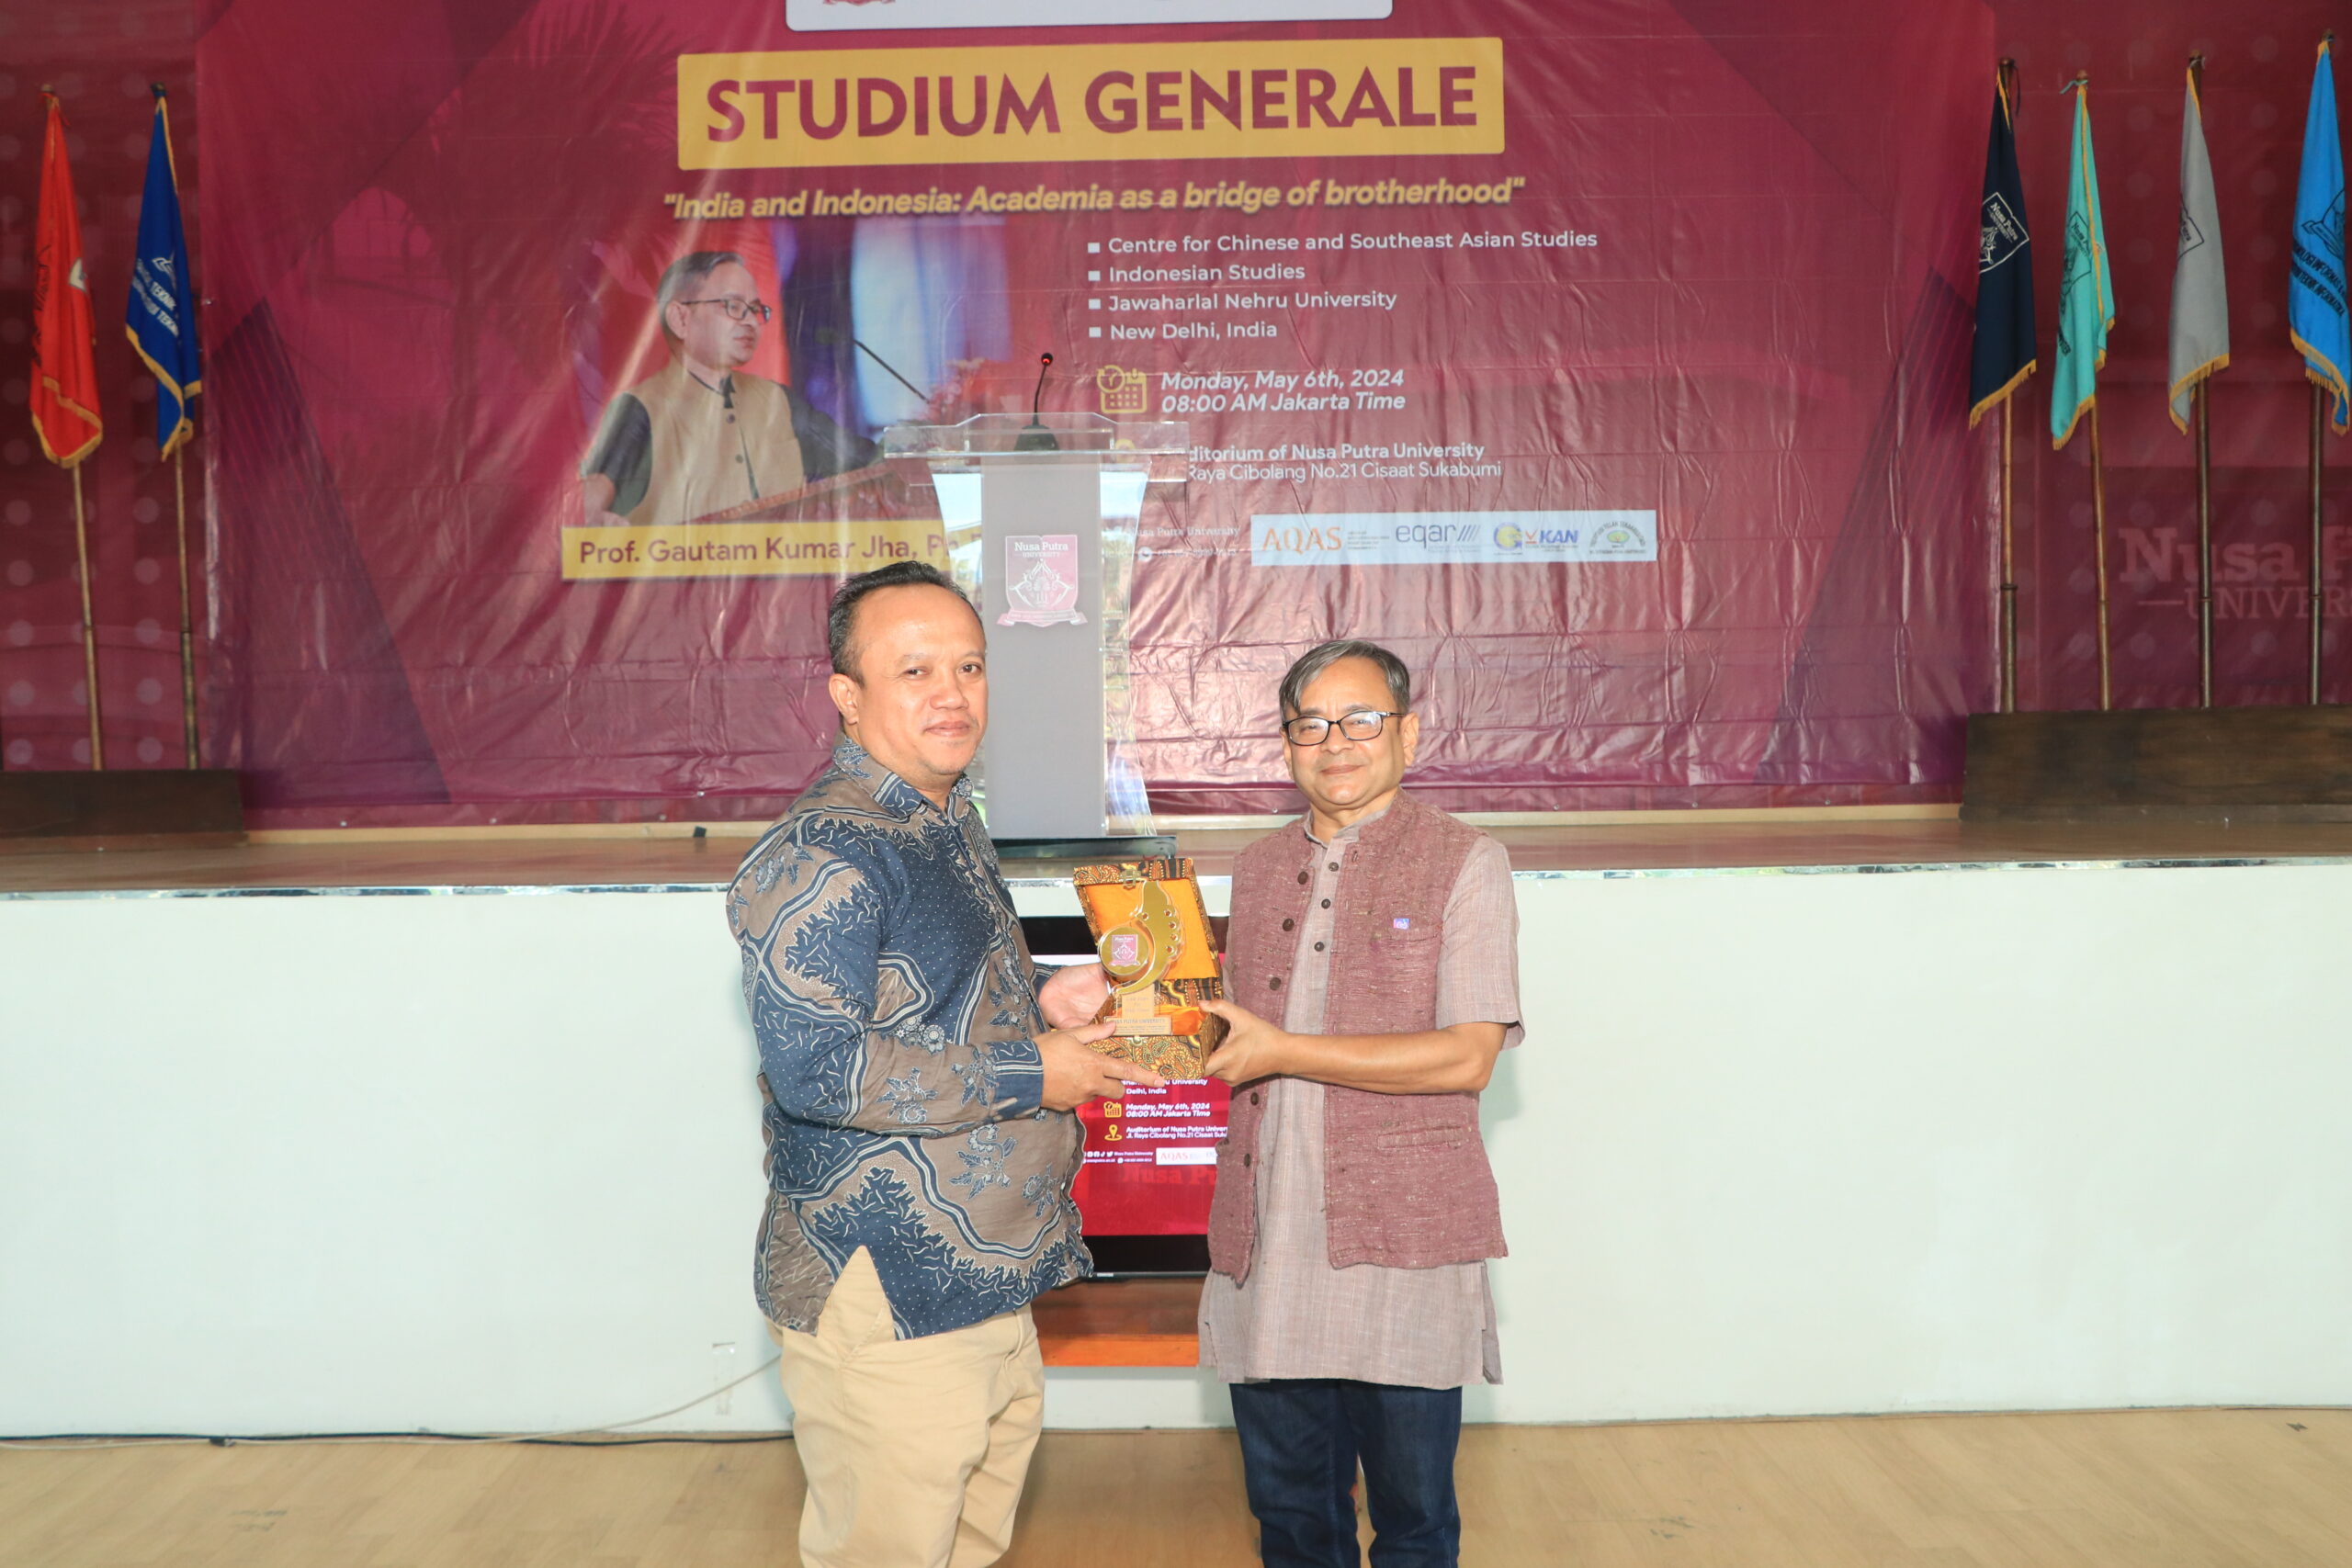 Public Lecture “India and Indonesia Academia as a Bridge of Brotherhood” with Professor of International Relations from Jawaharlal Nehru University, India